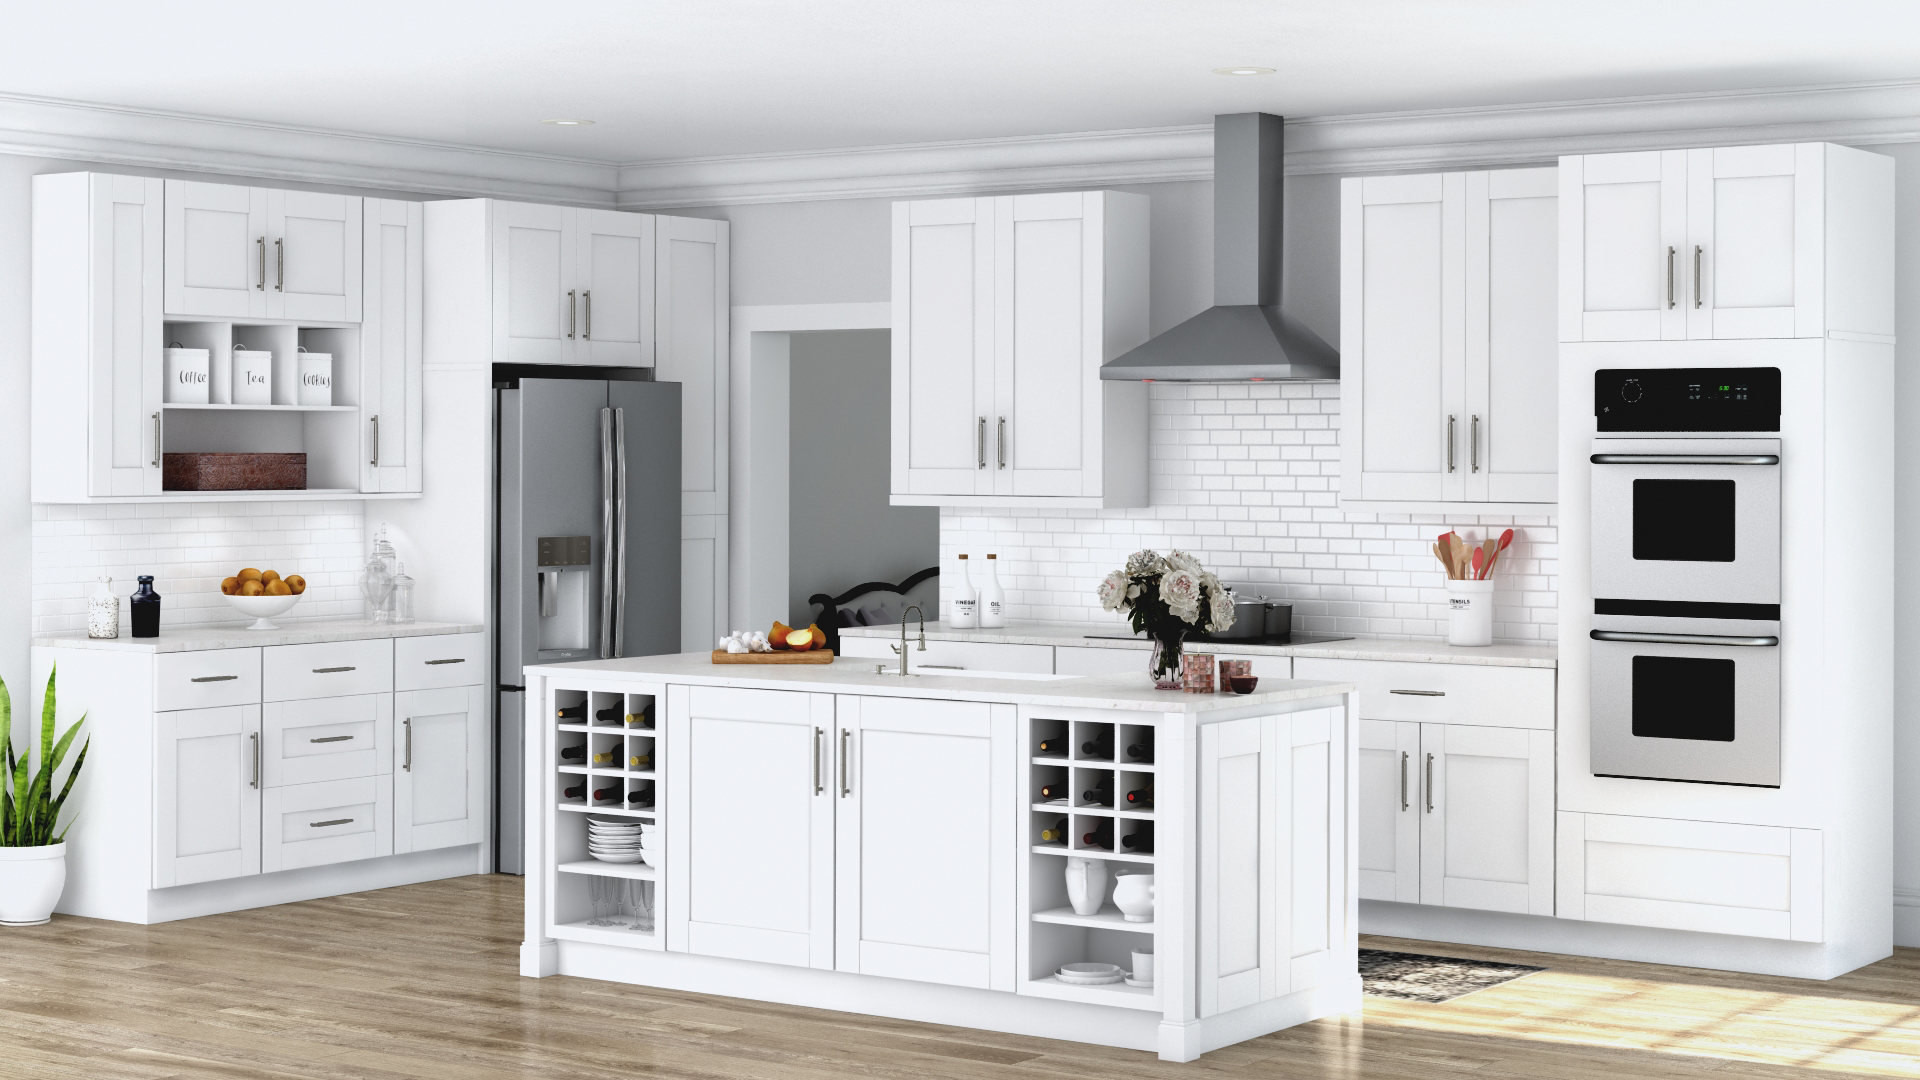 Wall Cabinet Kitchen
 Shaker Wall Cabinets in White – Kitchen – The Home Depot